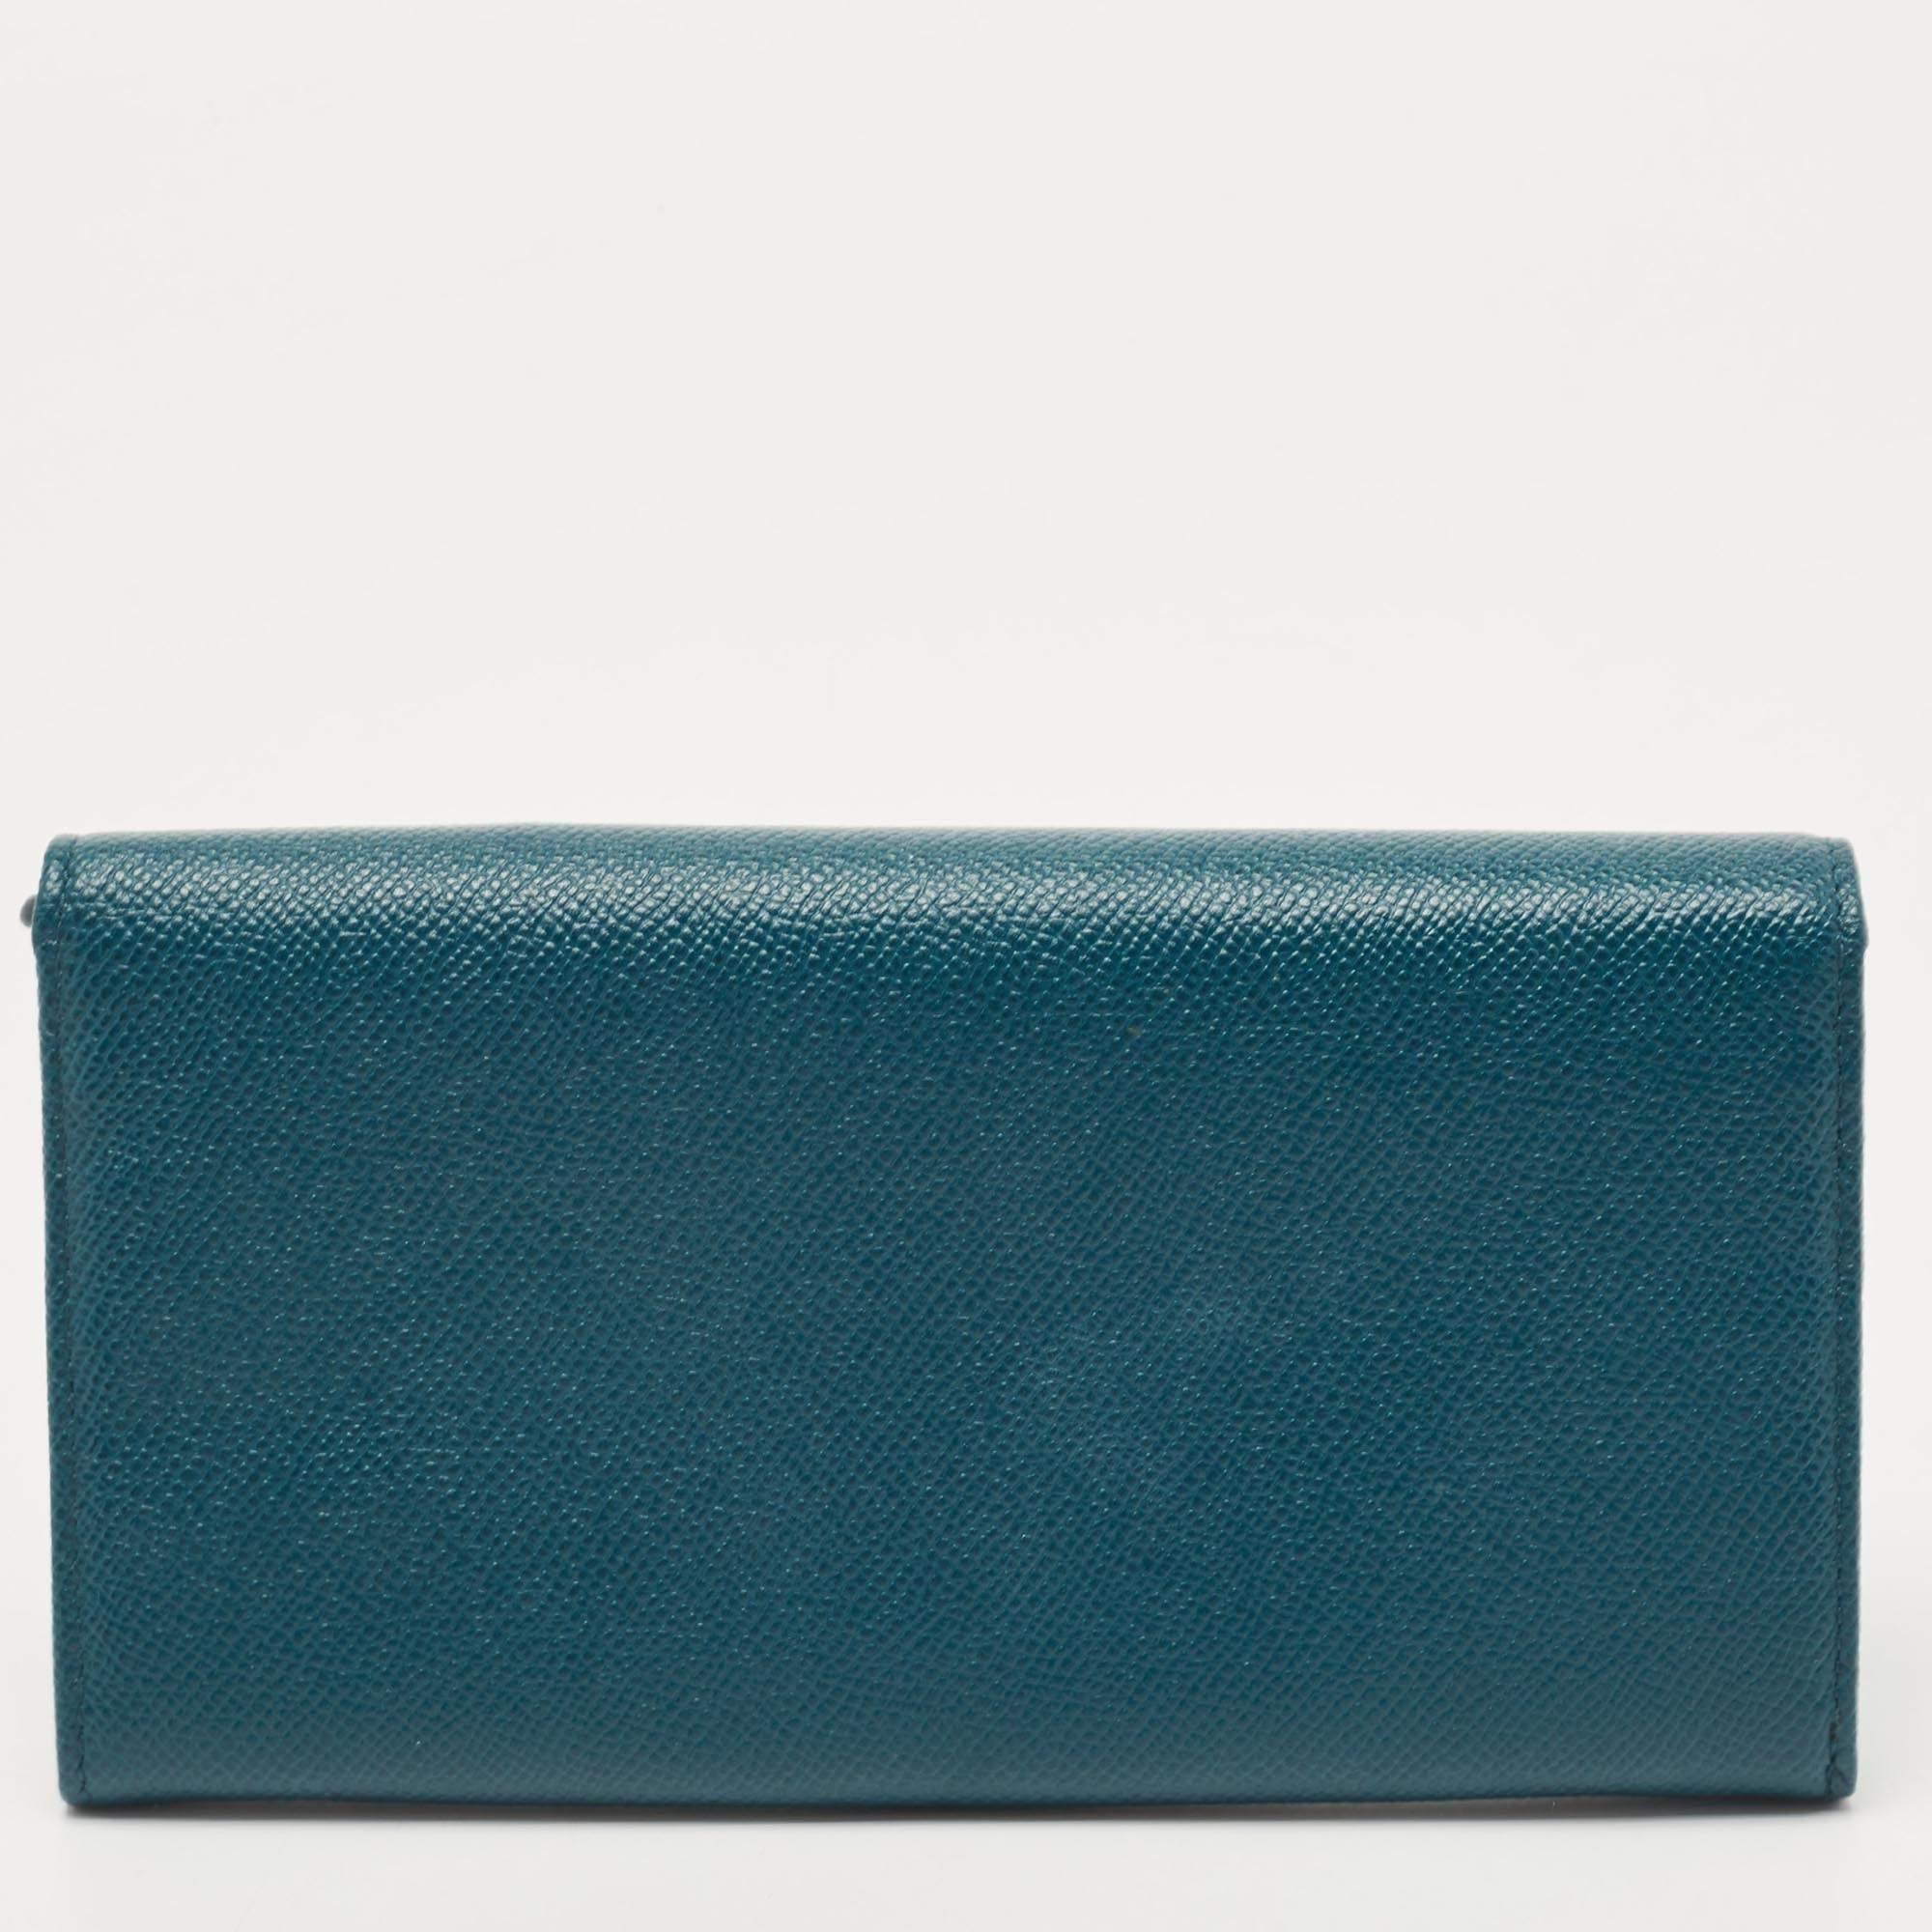 This designer wallet is an immaculate balance of sophistication and rational utility. It has been designed using prime quality materials and elevated by a sleek finish. The creation is equipped with ample space for your monetary